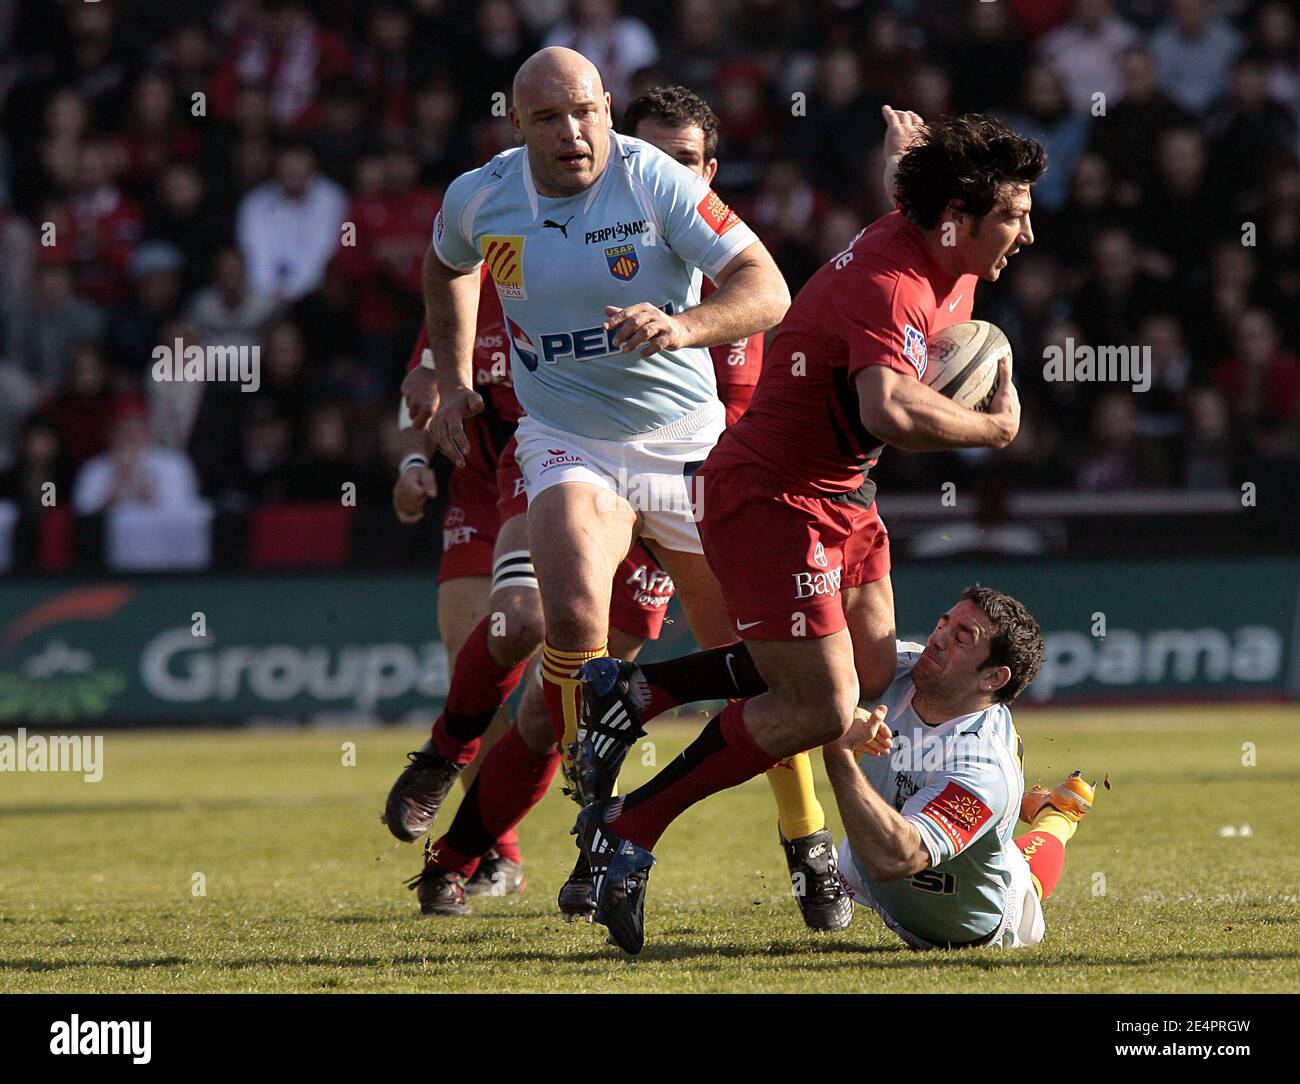 Le Stade Toulousain High Resolution Stock Photography and Images - Alamy